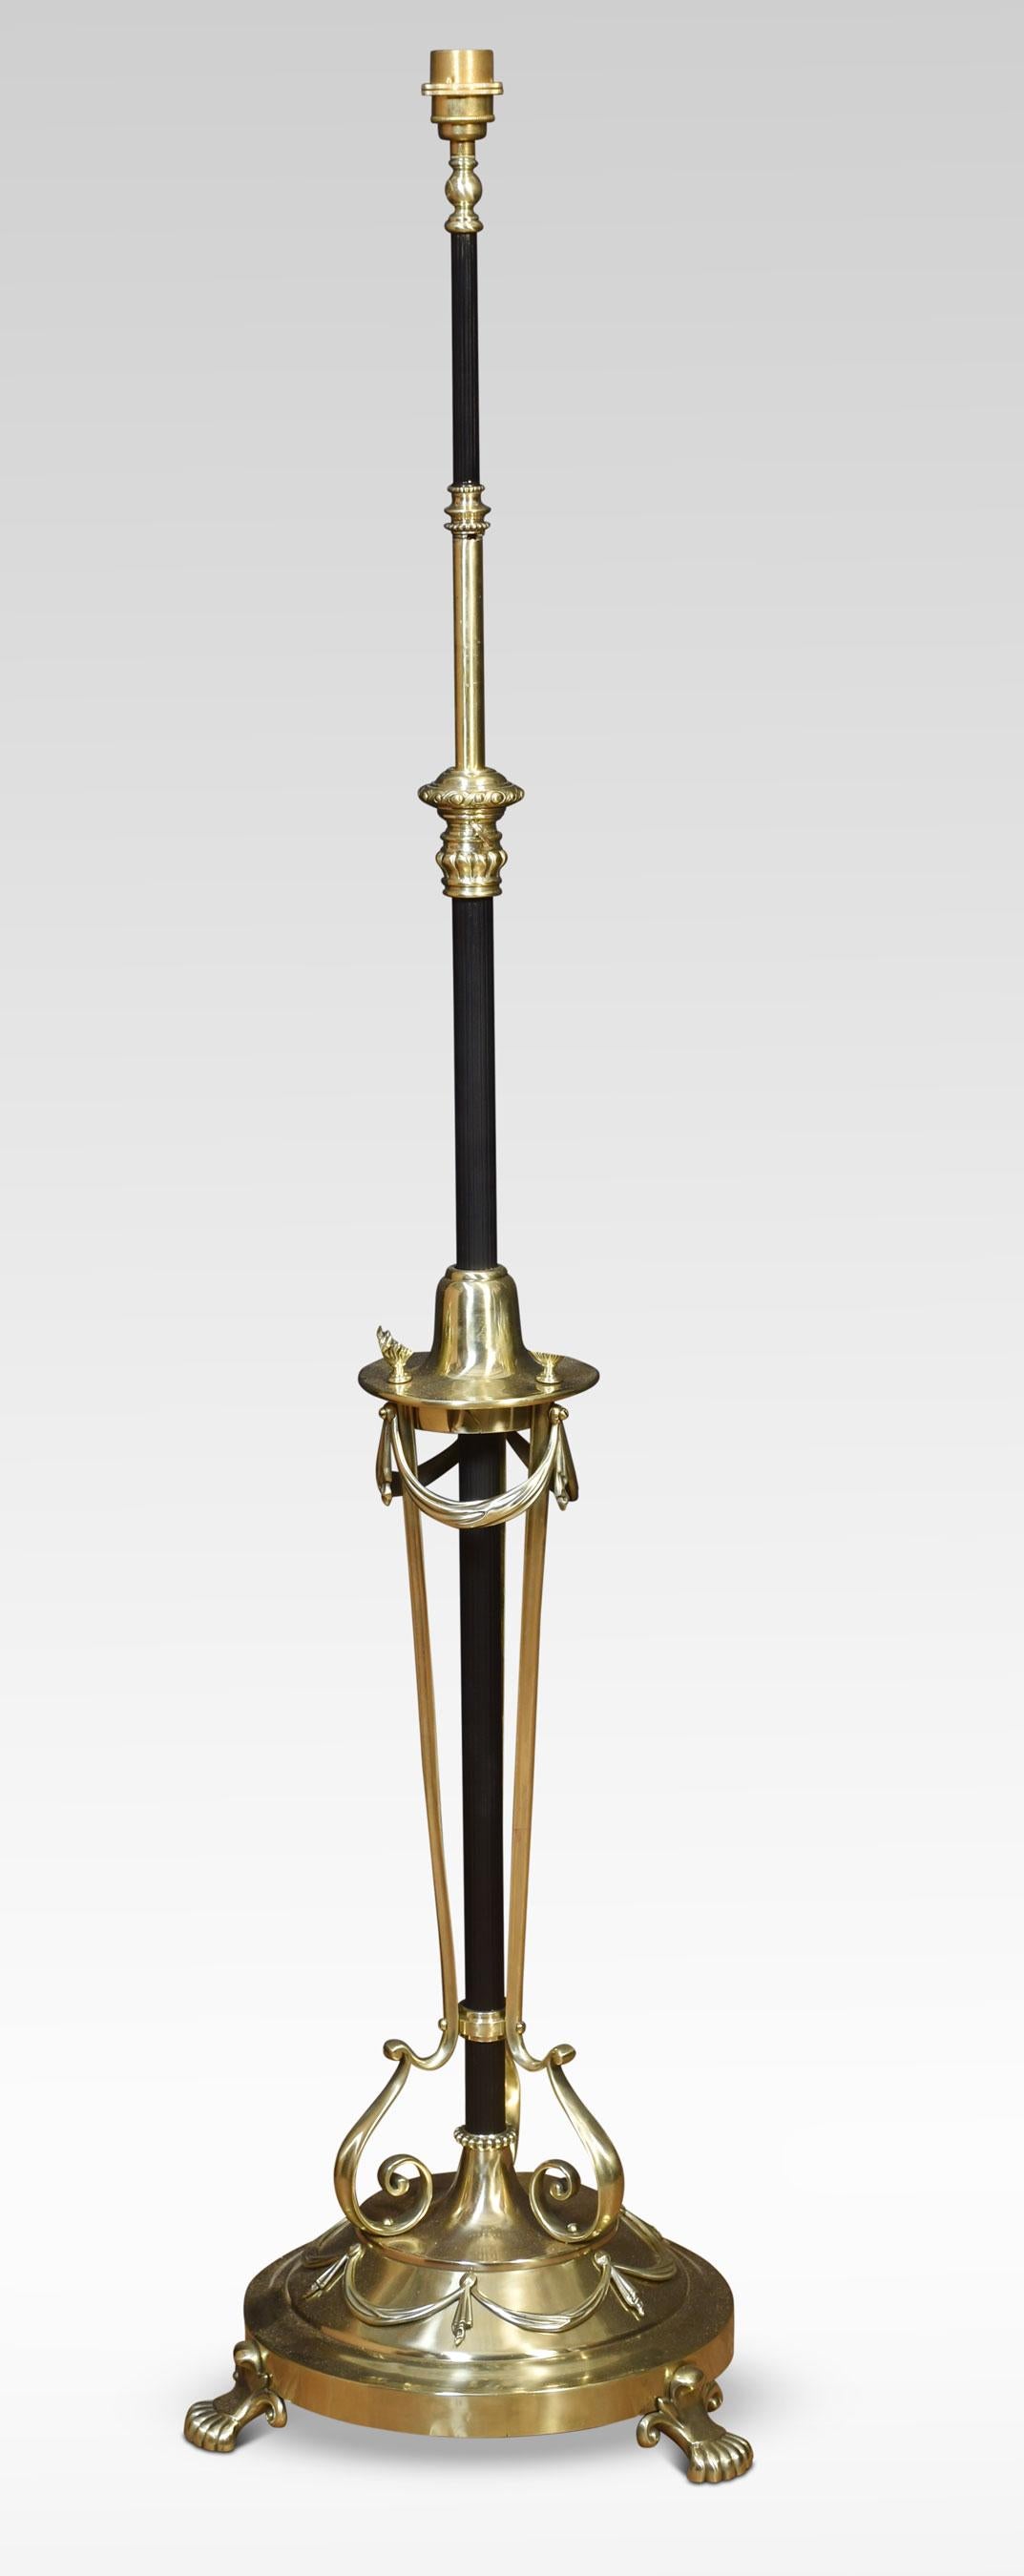 Brass standard lamp, with central ebonised brass column supported with scrolling supports. All raised up on a circular base with swag decoration terminating in paw feet.
Dimensions
Height 57 Inches when extended 68 Inches
Width 15 Inches
Depth